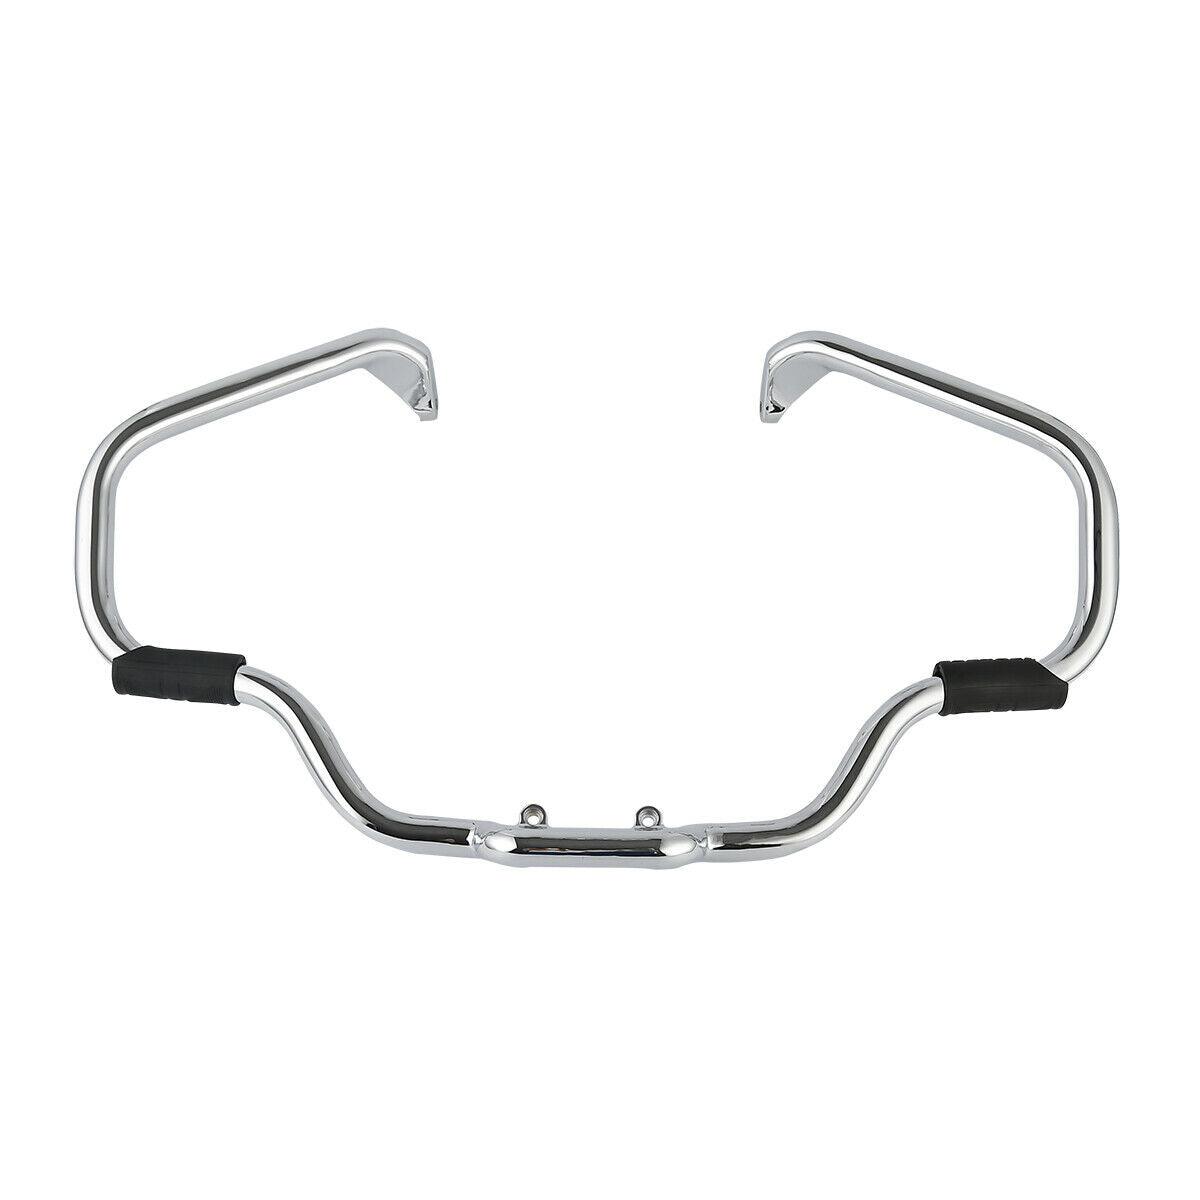 Mustache Engine Guard Crash Bar Fit For Indian Chieftain Dark Horse 2016-2020 - Moto Life Products